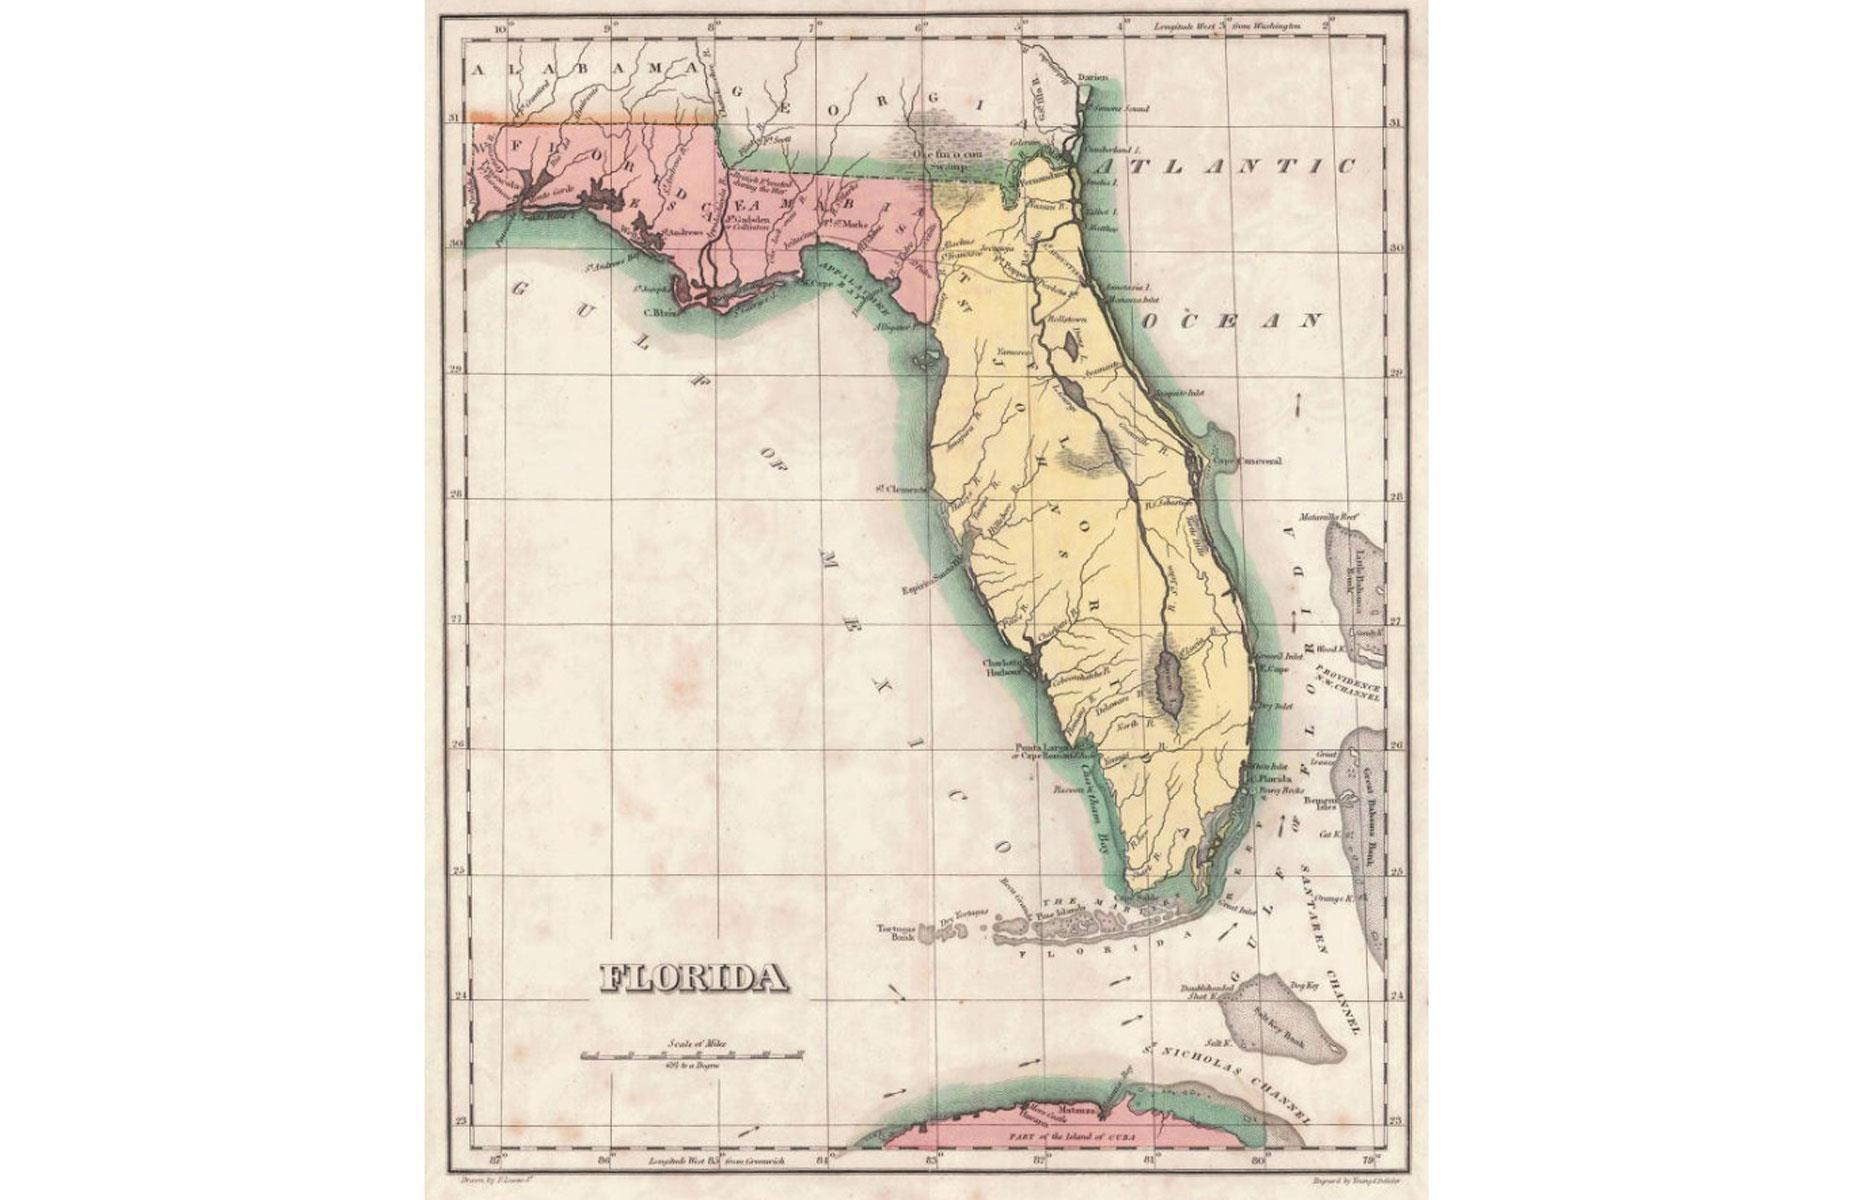 America's purchase of Florida from Spain, 1819